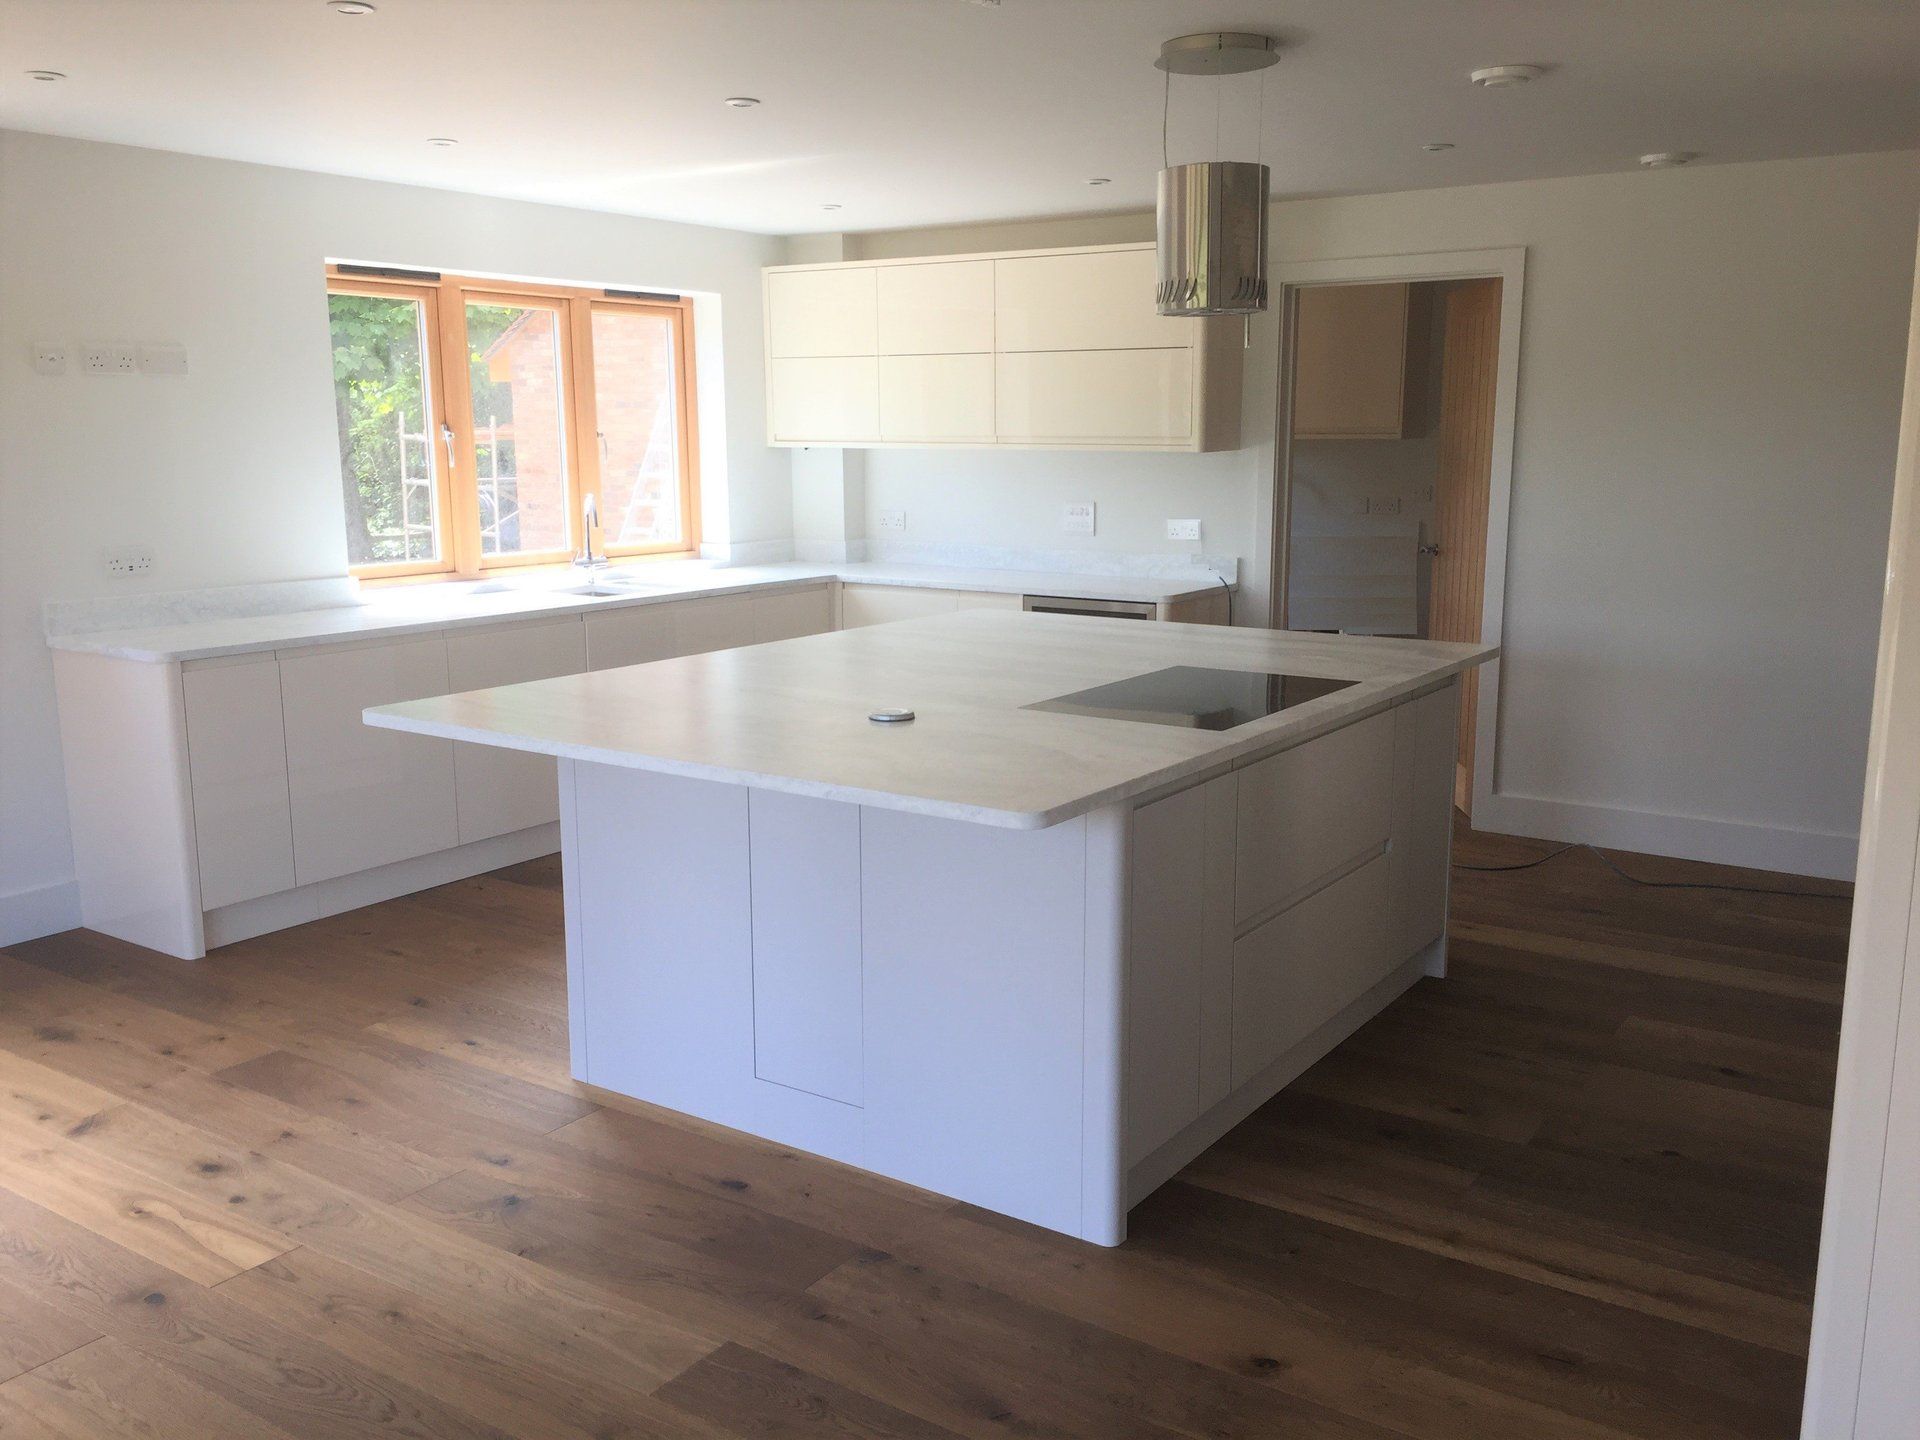 Kitchen fit and installation. Surrey. Builder. Building contractor. Construction. Carpentry. Carpentry contractor. Extensions. New builds. Timber frame fabrication and erection. Design and build. Kitchen installations. Horsham. Surrey. Reigate. Redhill. Dorking. Crawley. West Sussex. Cranleigh.